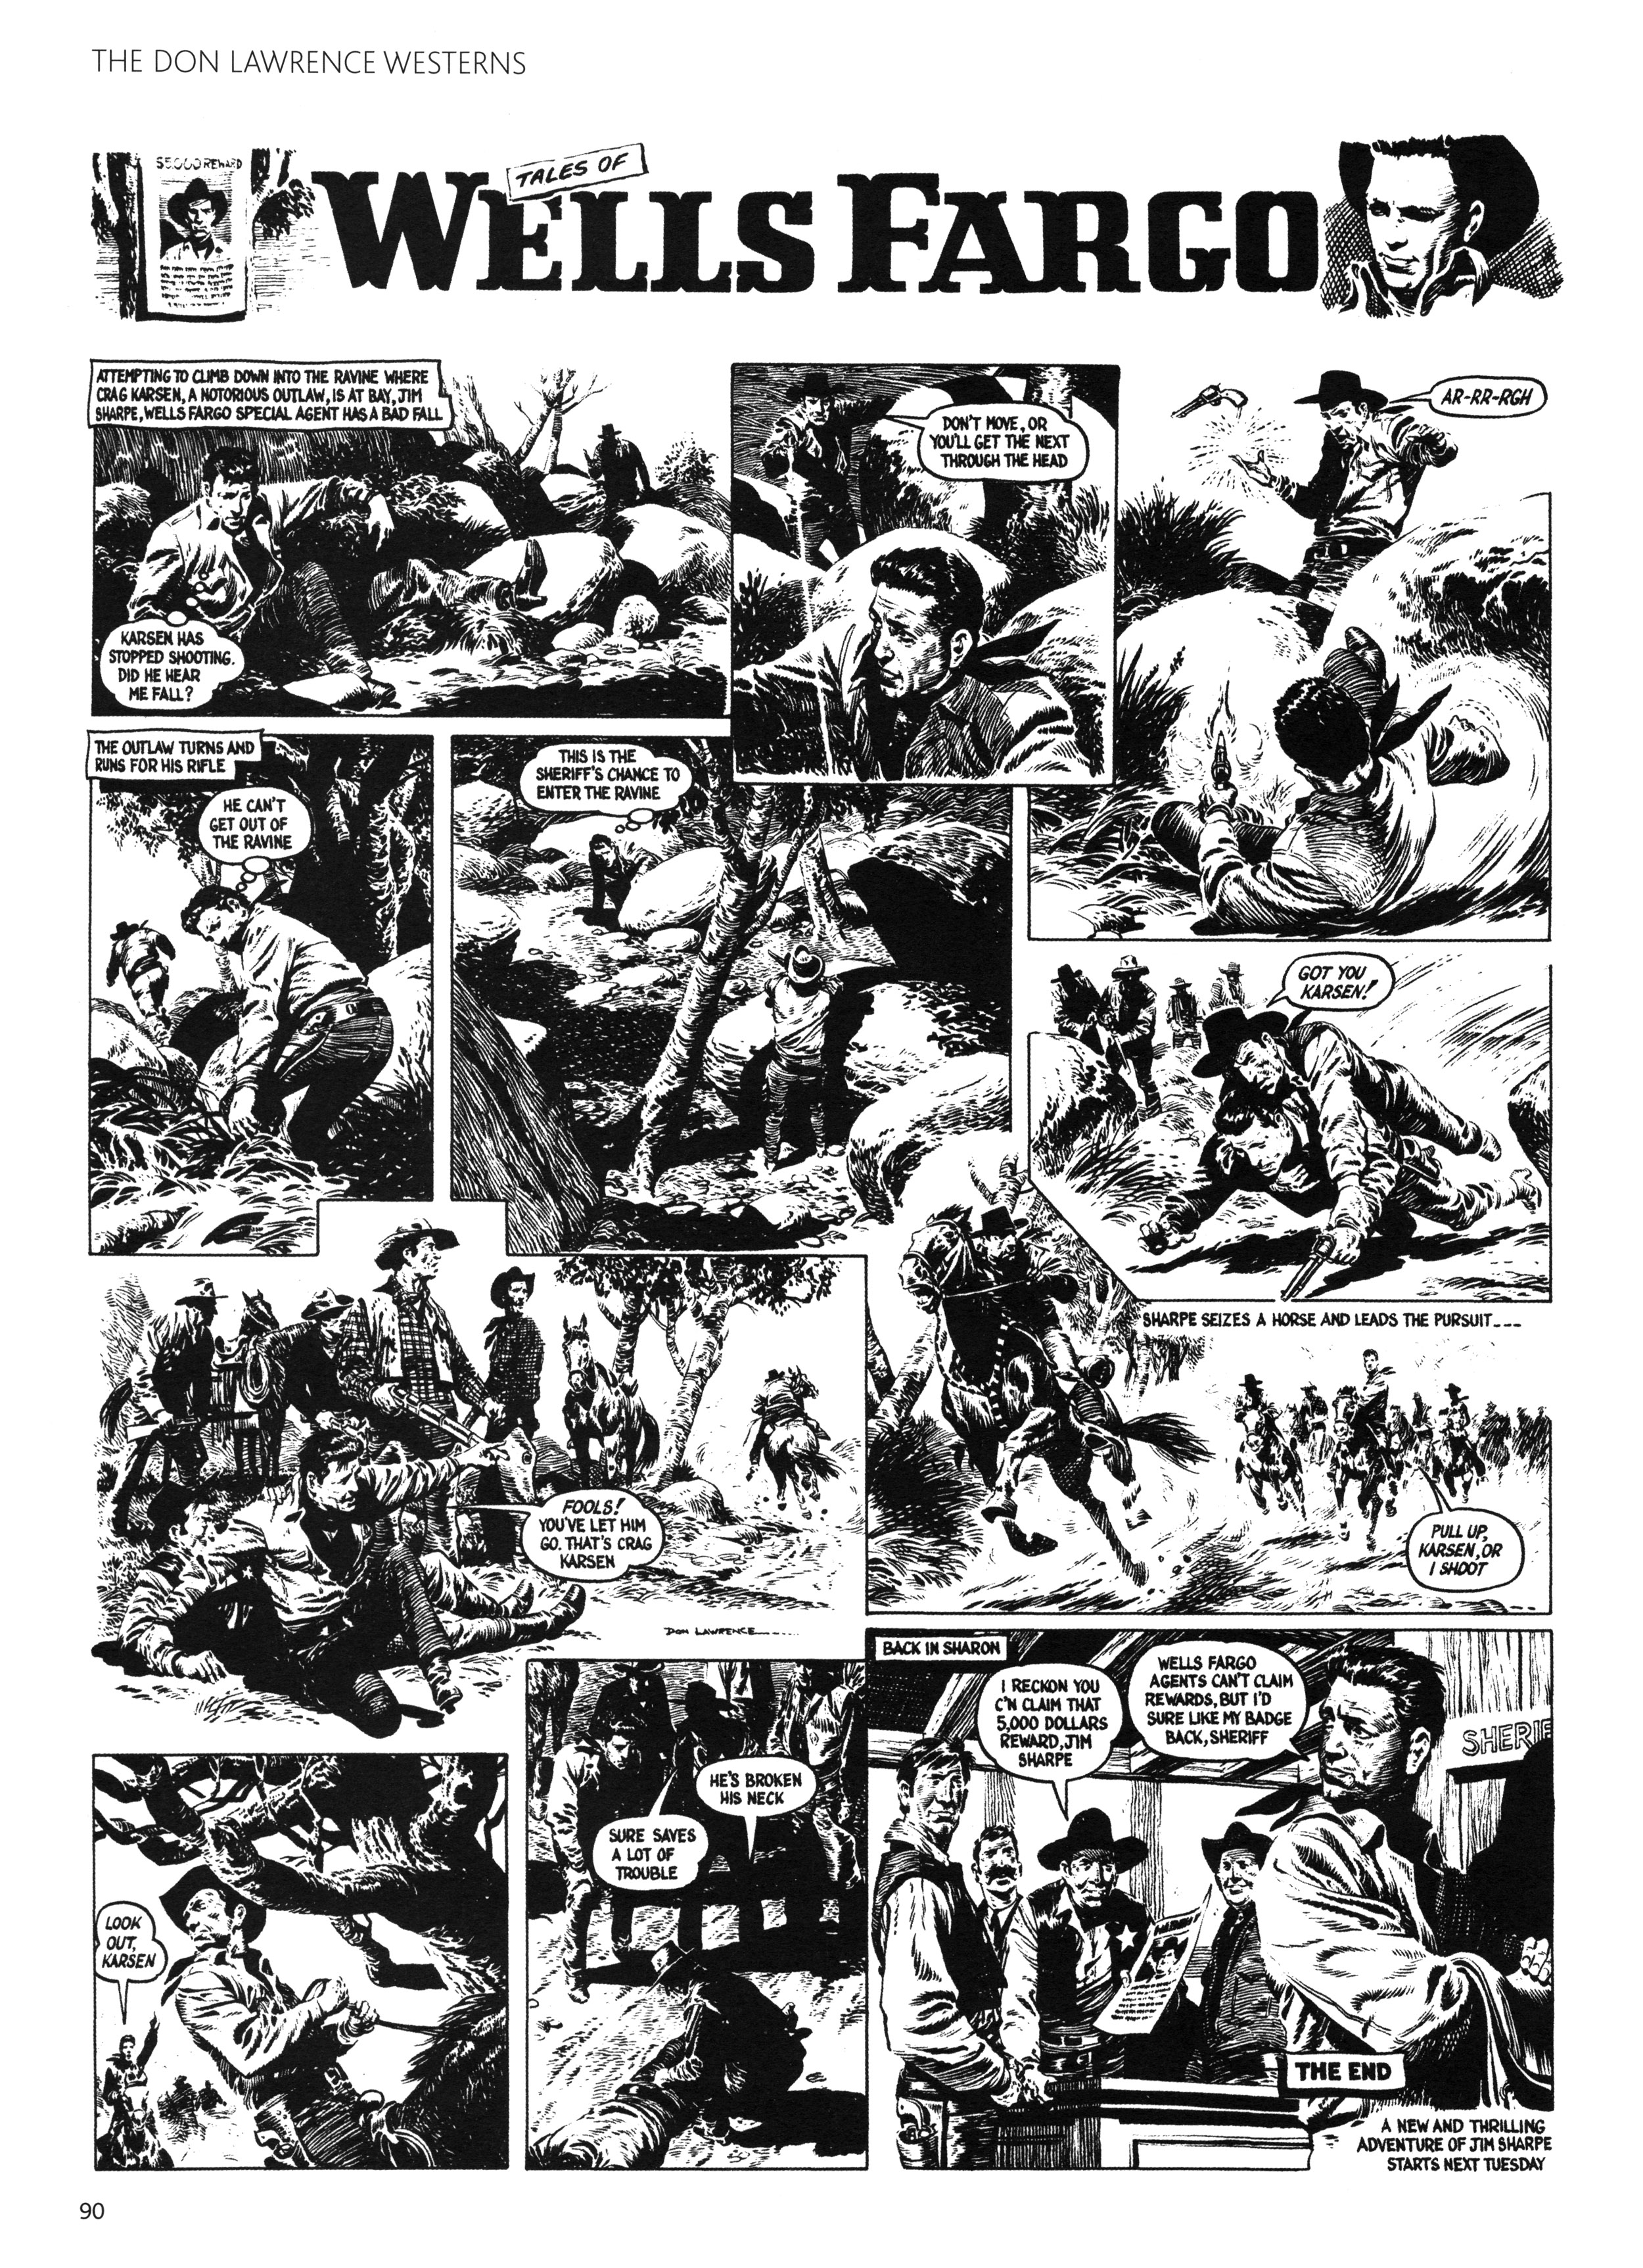 Read online Don Lawrence Westerns comic -  Issue # TPB (Part 1) - 94